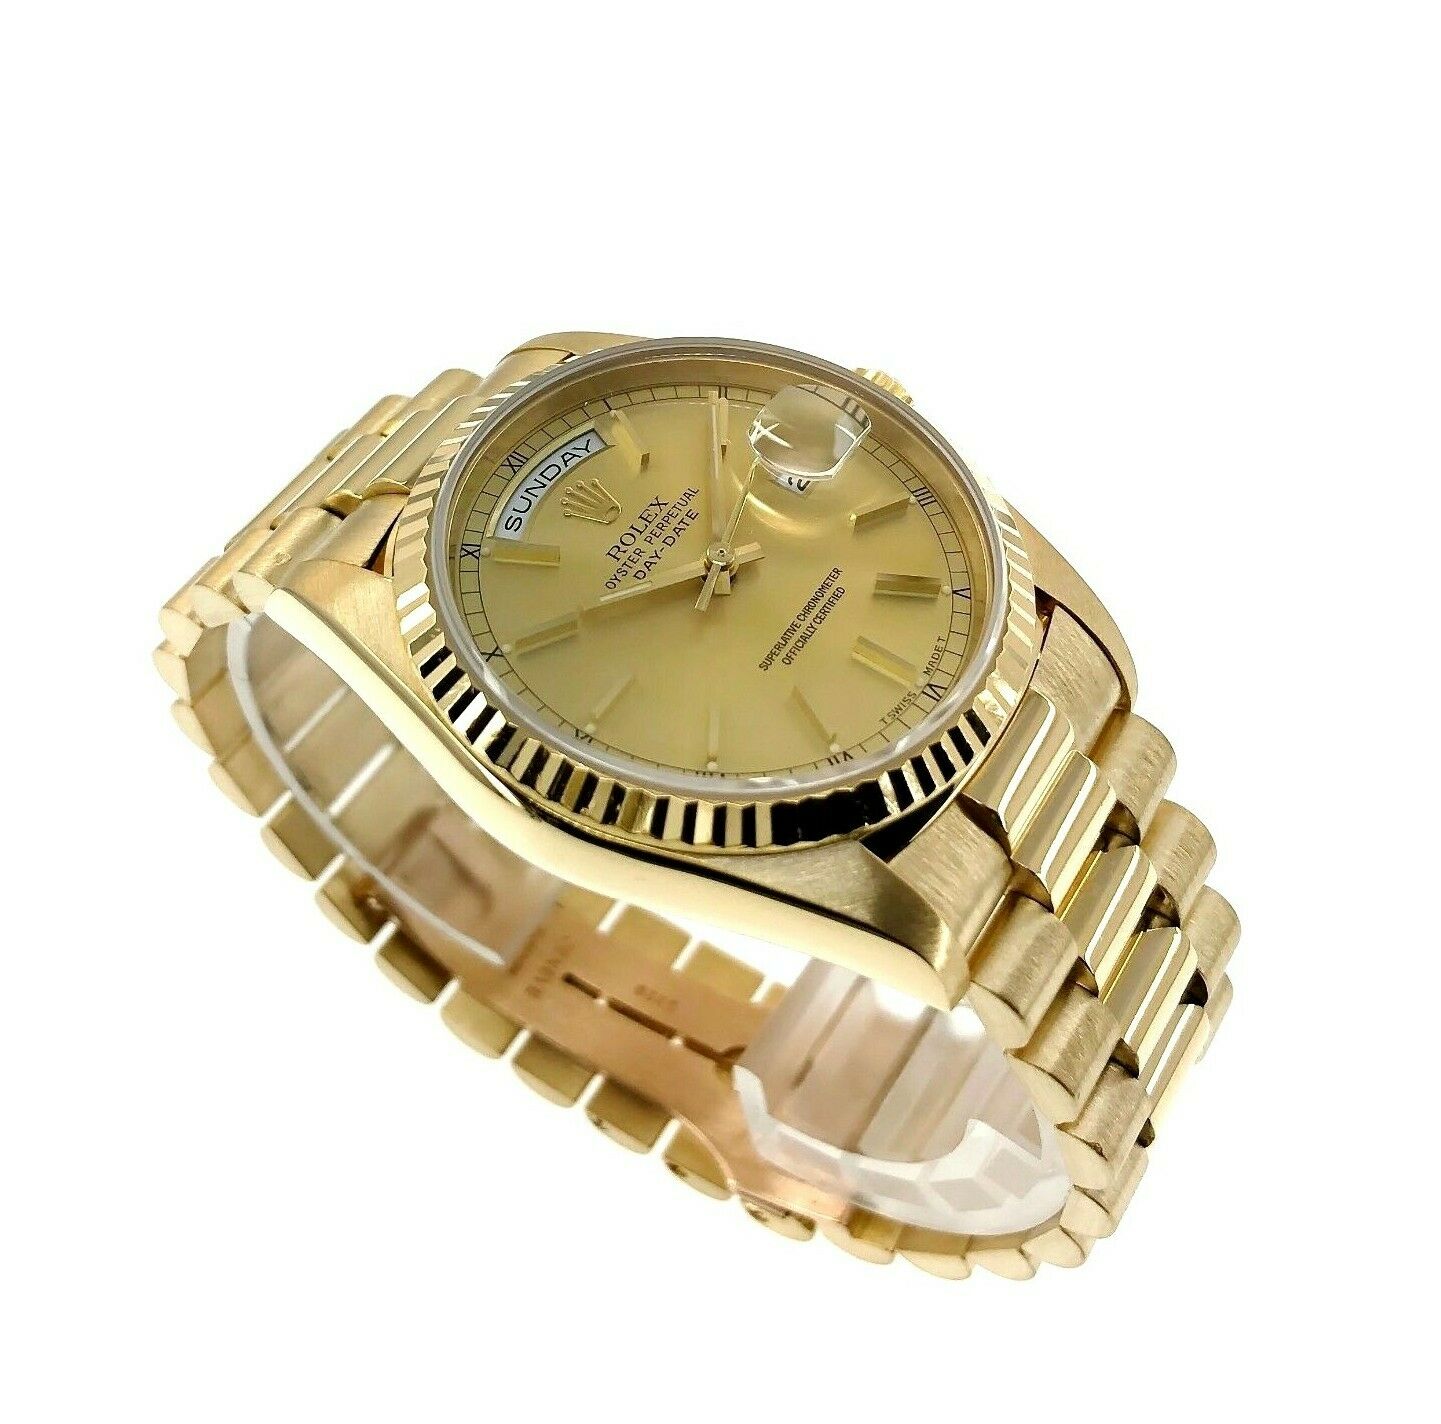 Rolex Day Date President 18K Yellow Gold 36mm Watch 18238 Factory Dial BoxPapers